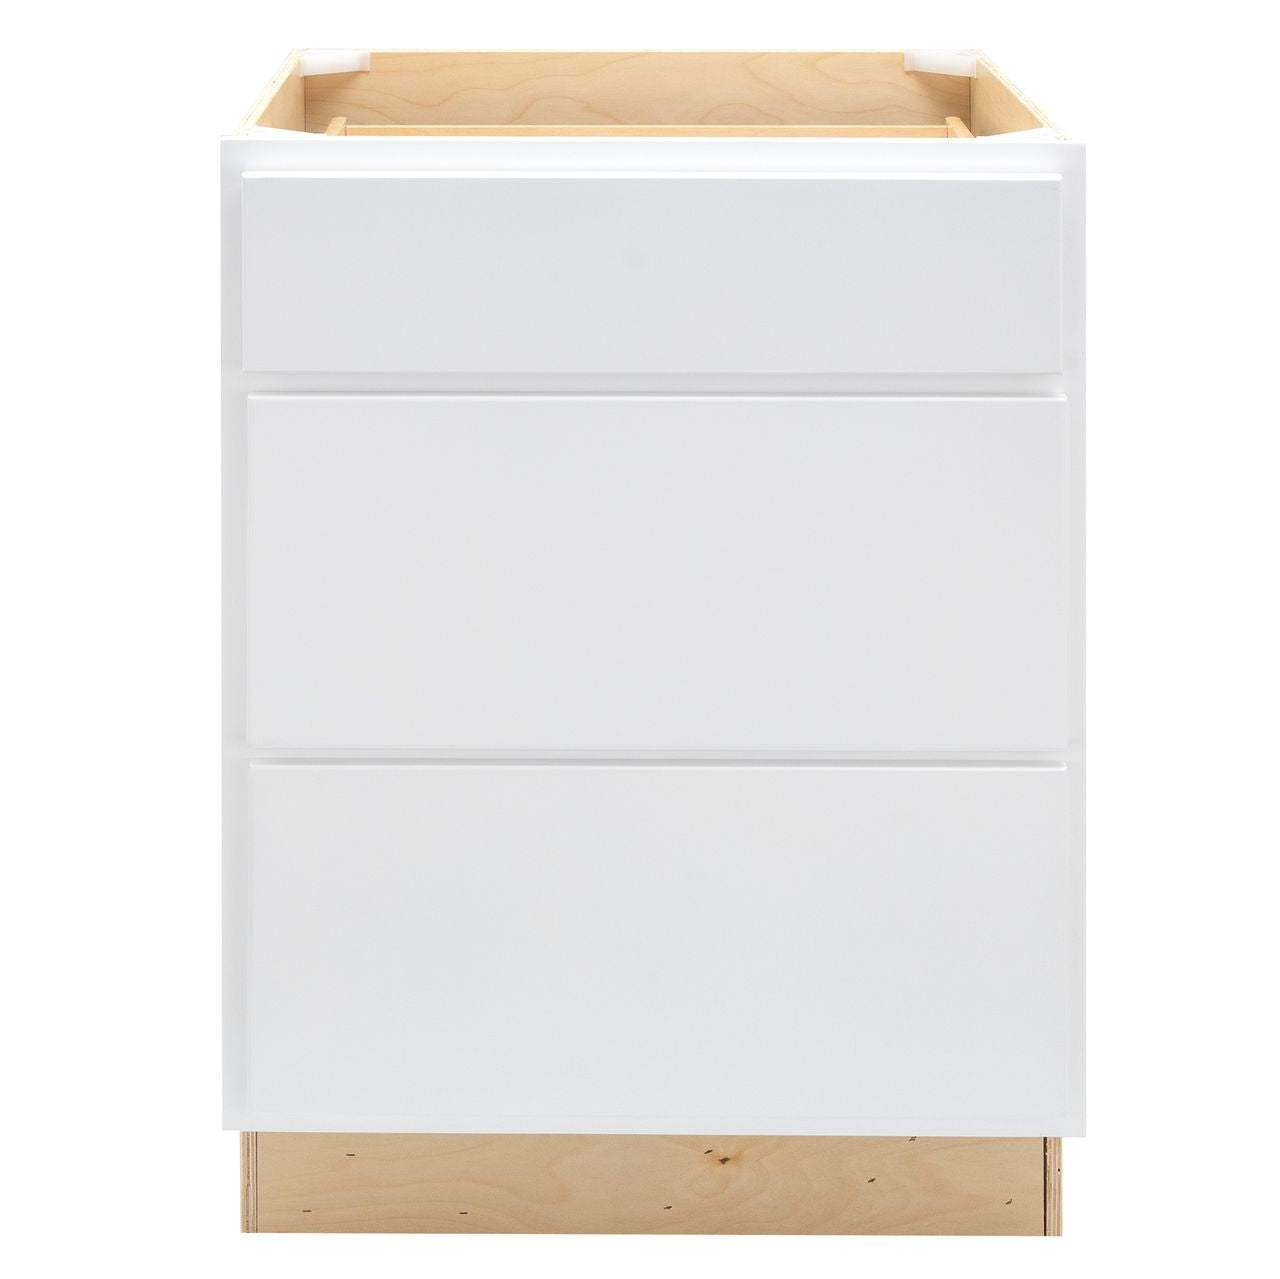 Quicklock Pure White 3 Drawer Pots and Pans Base Cabinet- Medium (18", 21", 24"W)